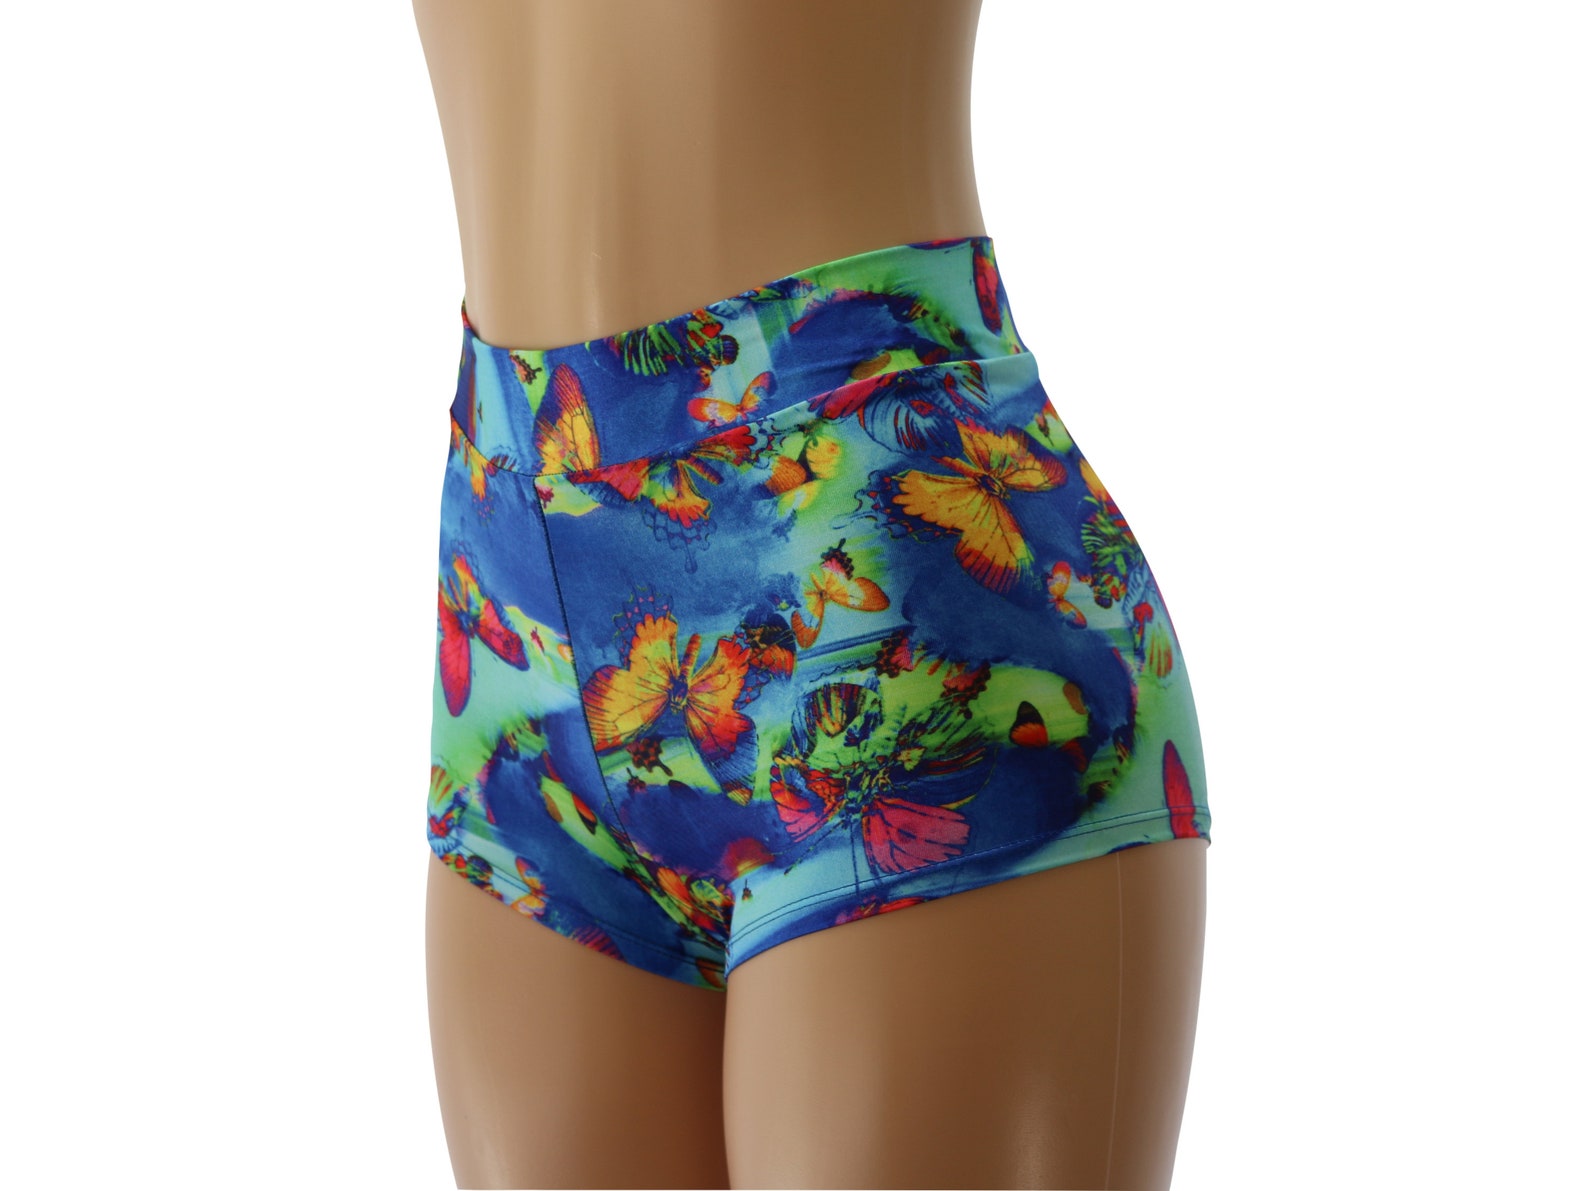 Colorful Butterflies Spandex. High Waist Cheeky Booty Shorts. - Etsy